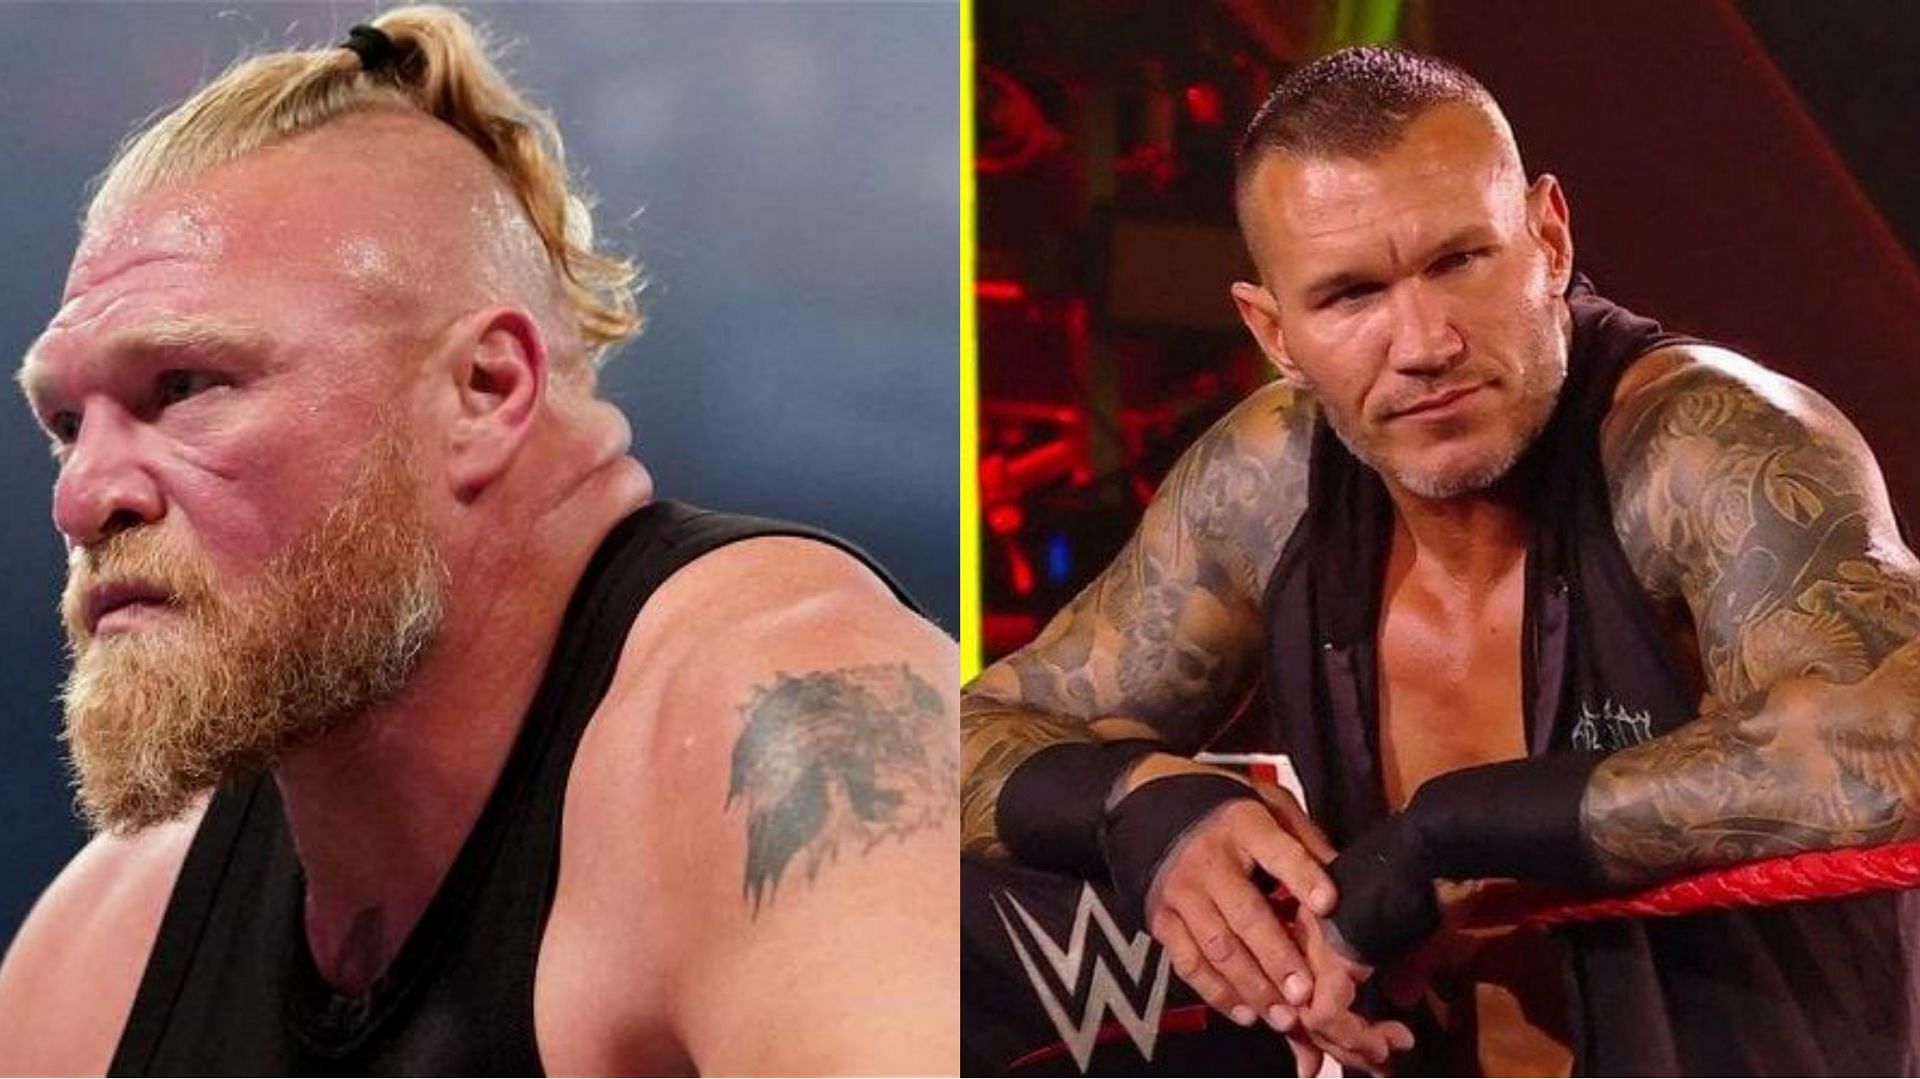 Brock Lesnar (left) and Randy Orton (right)